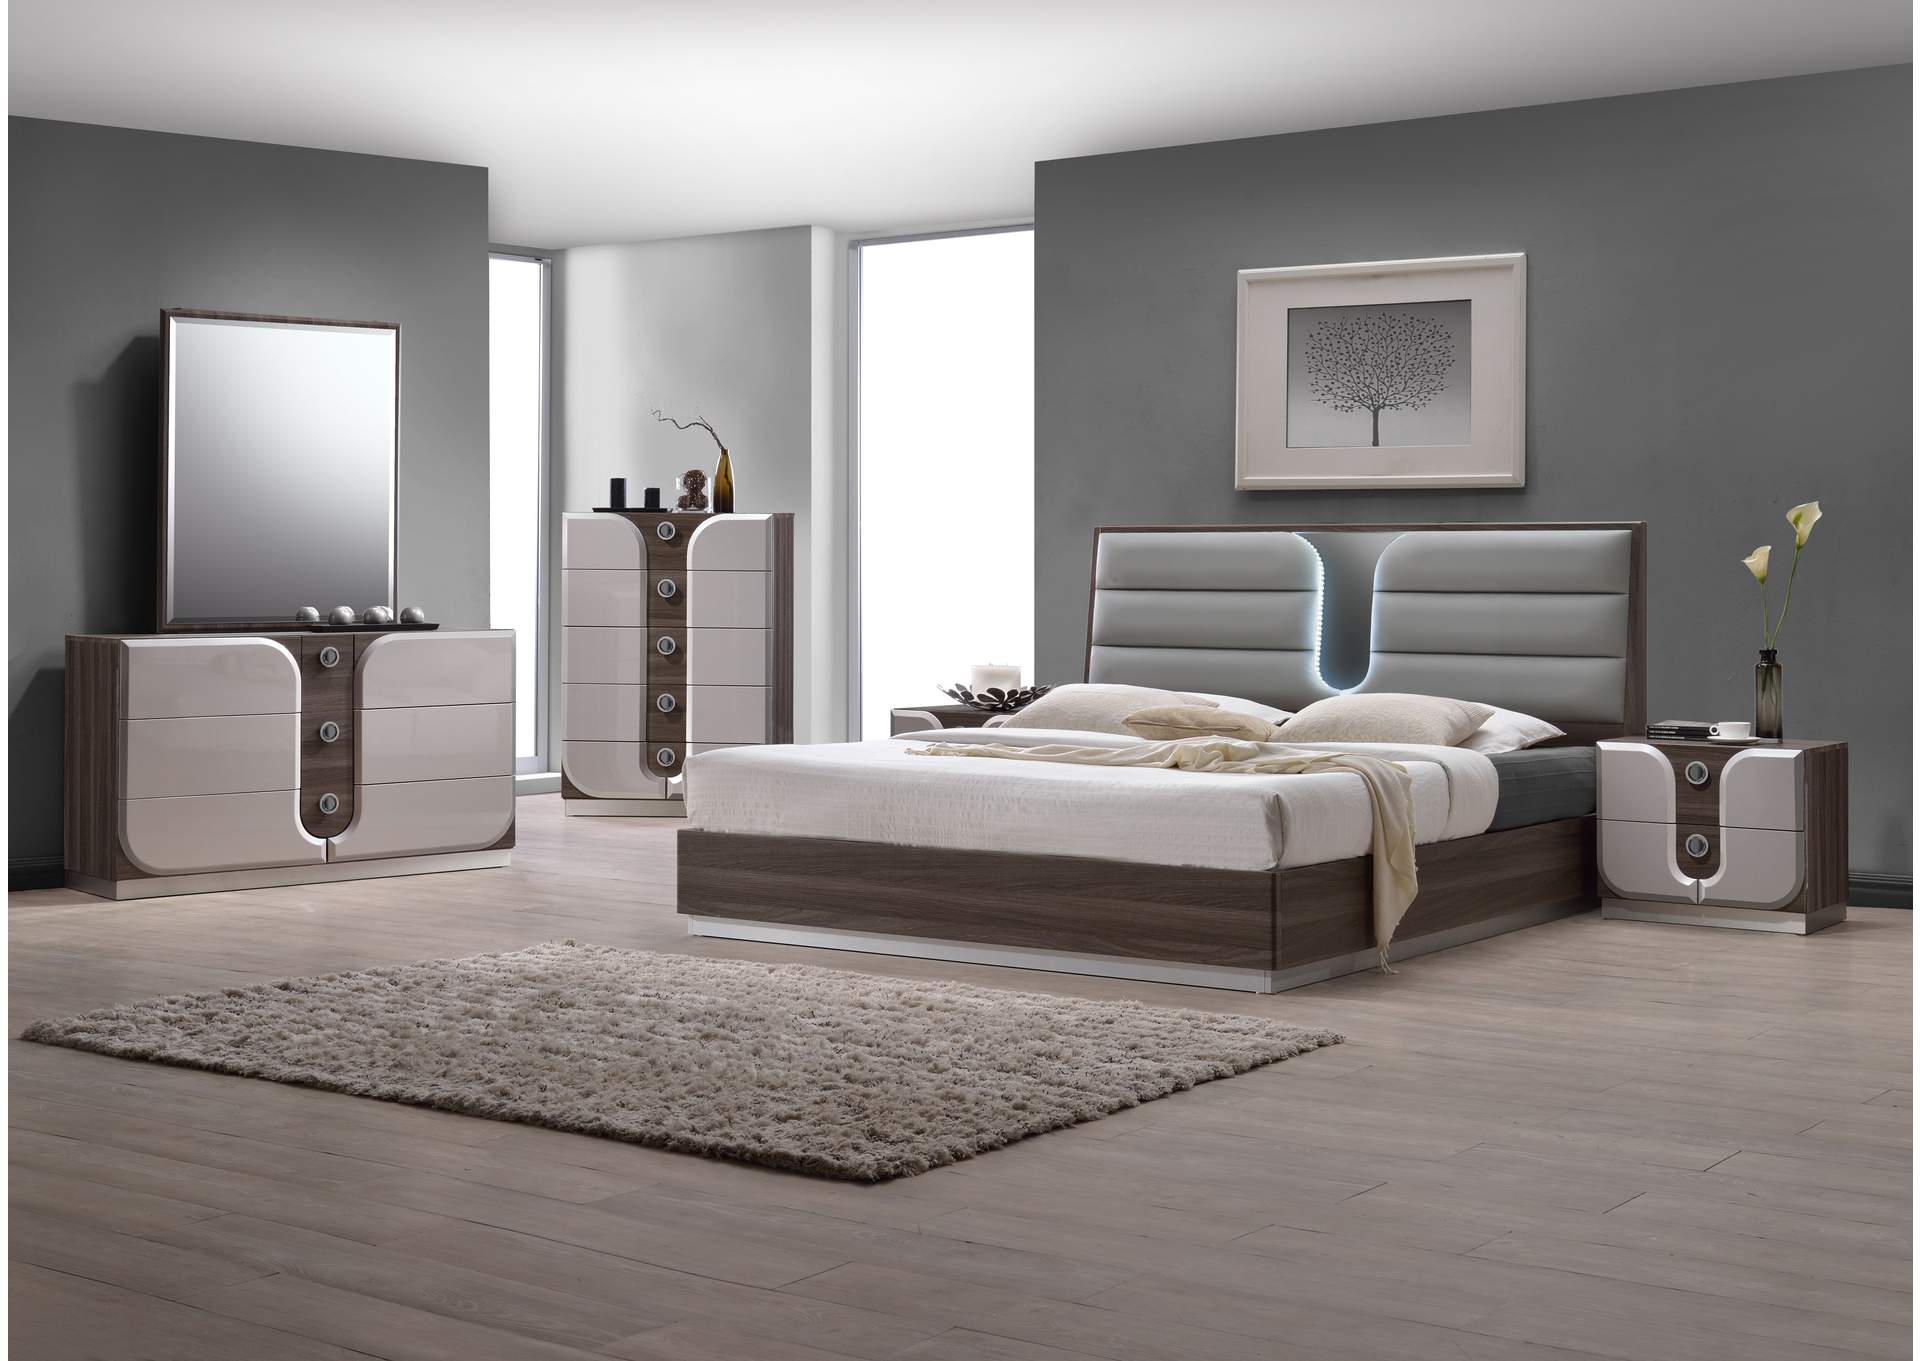 Modern King Size Bed,Chintaly Imports